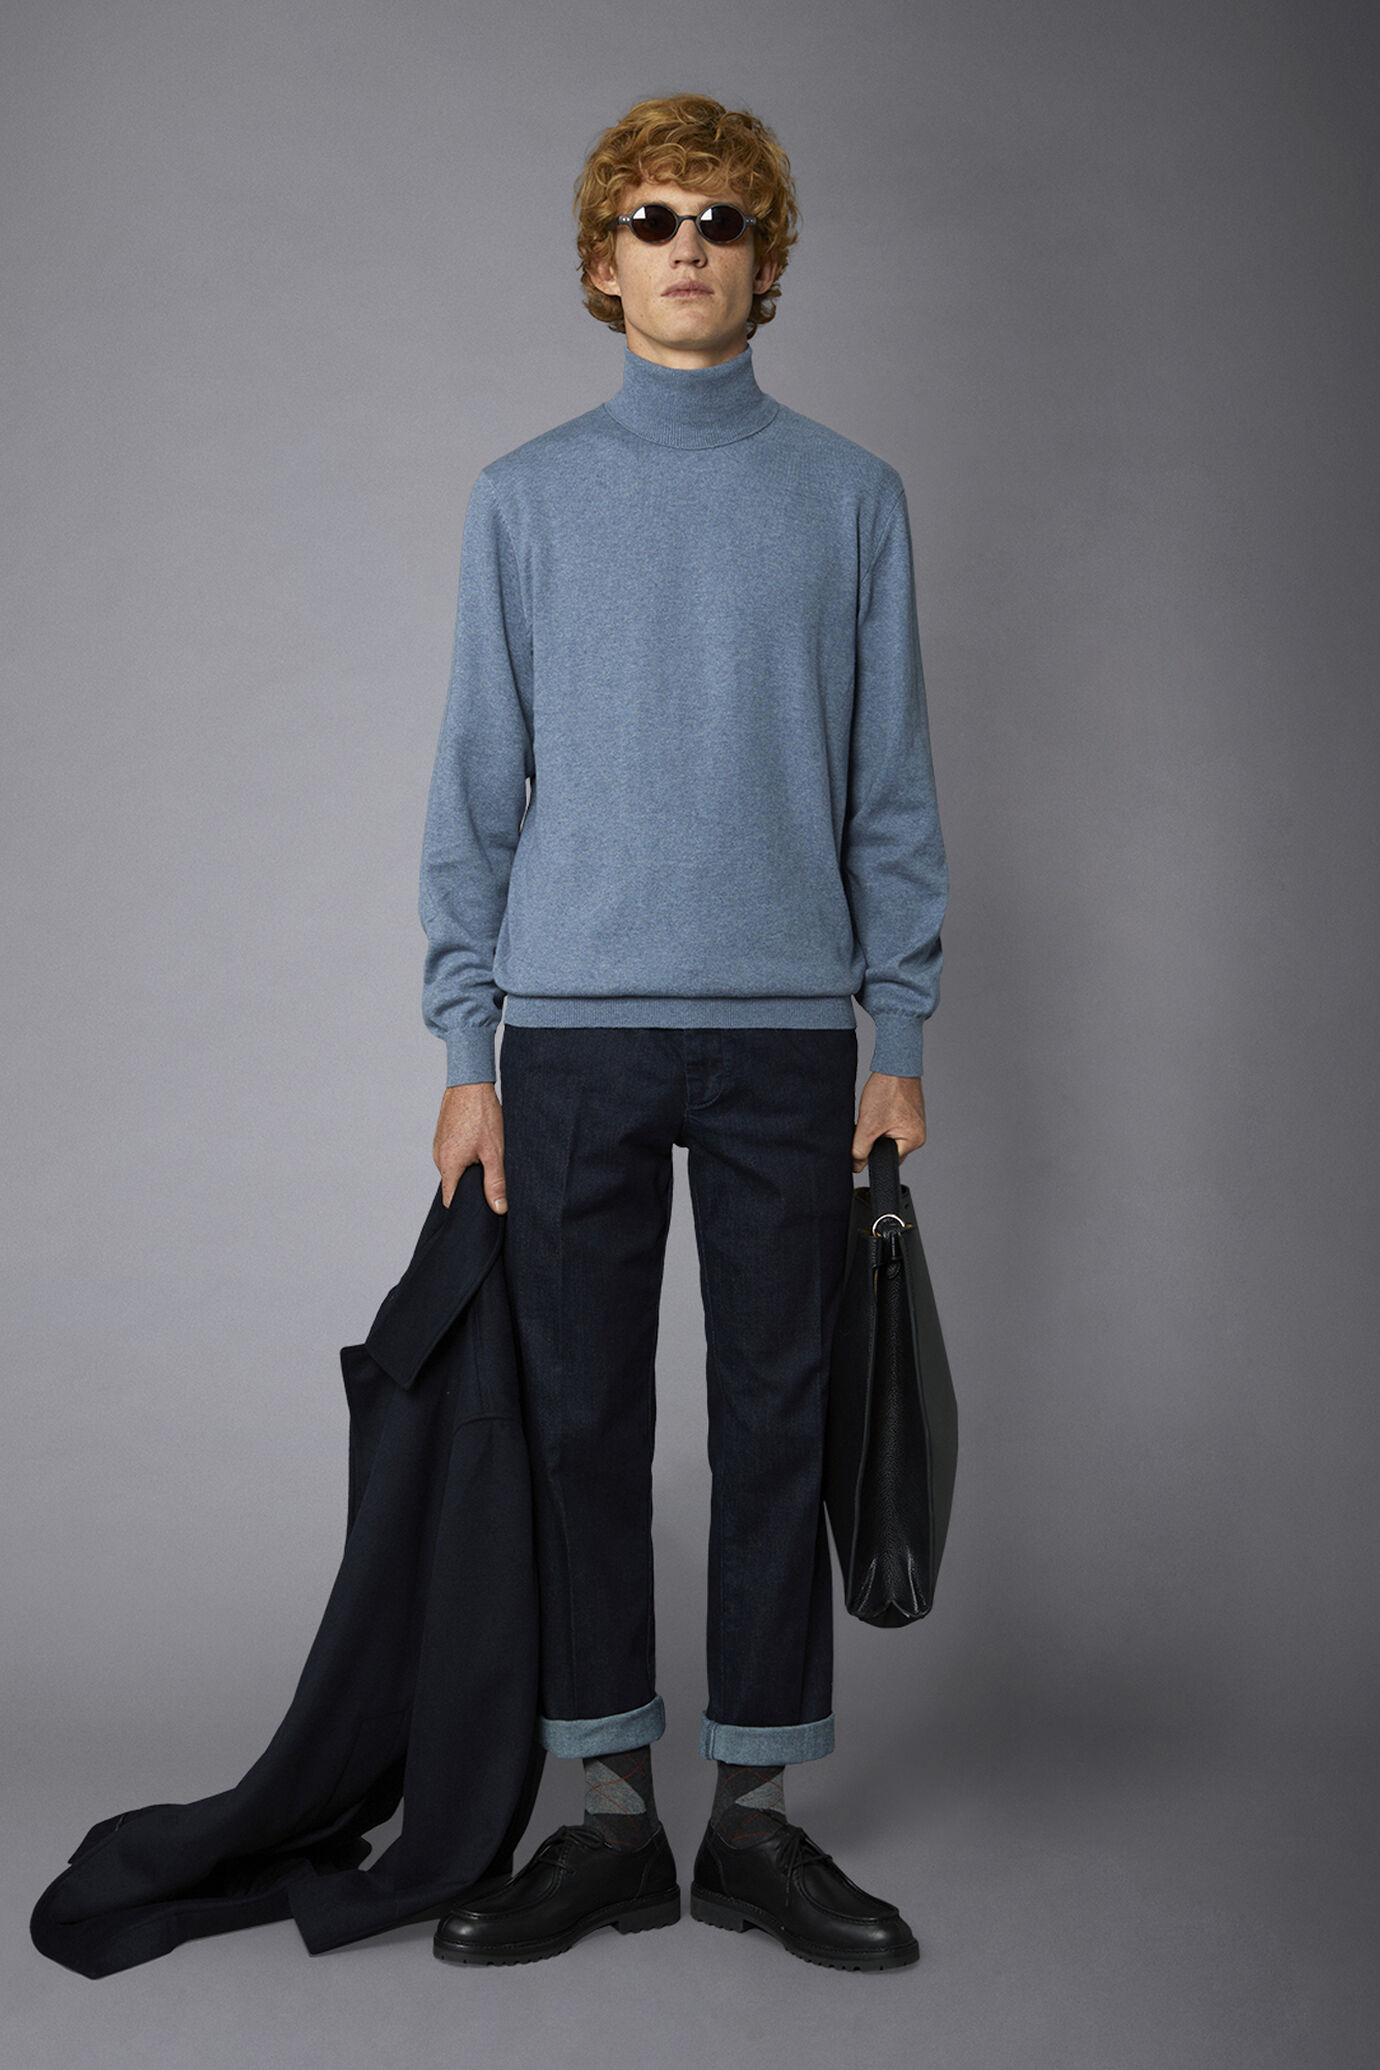 Men's wool and cotton turtleneck sweater